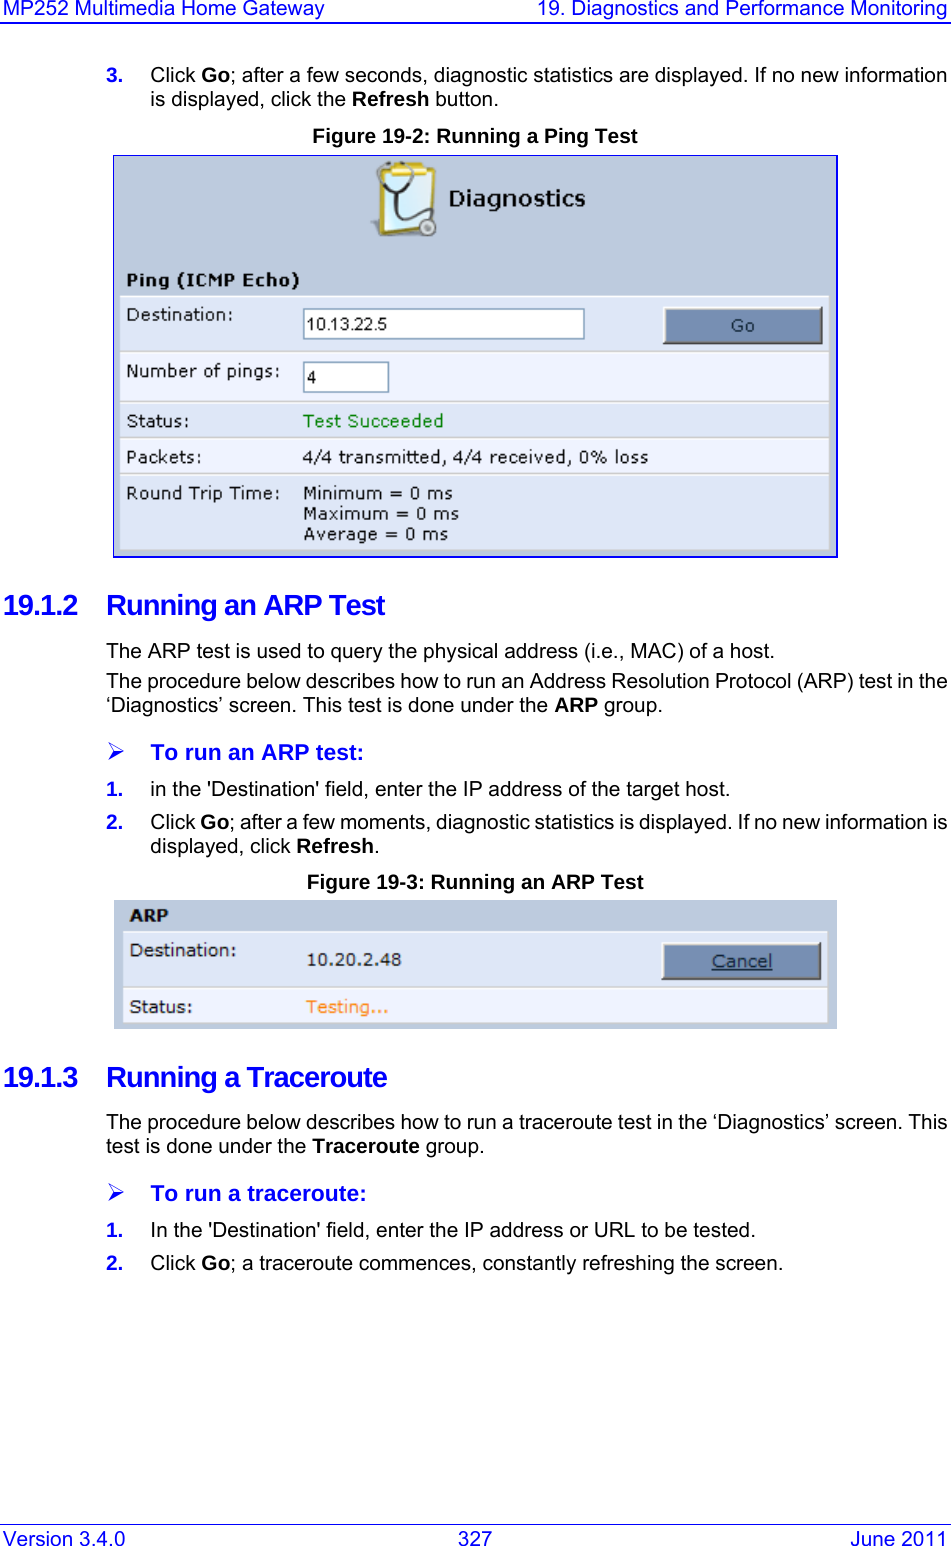 MP252 Multimedia Home Gateway  19. Diagnostics and Performance Monitoring Version 3.4.0  327  June 2011 3.  Click Go; after a few seconds, diagnostic statistics are displayed. If no new information is displayed, click the Refresh button. Figure 19-2: Running a Ping Test  19.1.2  Running an ARP Test The ARP test is used to query the physical address (i.e., MAC) of a host.  The procedure below describes how to run an Address Resolution Protocol (ARP) test in the ‘Diagnostics’ screen. This test is done under the ARP group. ¾ To run an ARP test: 1.  in the &apos;Destination&apos; field, enter the IP address of the target host. 2.  Click Go; after a few moments, diagnostic statistics is displayed. If no new information is displayed, click Refresh. Figure 19-3: Running an ARP Test  19.1.3  Running a Traceroute The procedure below describes how to run a traceroute test in the ‘Diagnostics’ screen. This test is done under the Traceroute group. ¾ To run a traceroute: 1.  In the &apos;Destination&apos; field, enter the IP address or URL to be tested. 2.  Click Go; a traceroute commences, constantly refreshing the screen. 